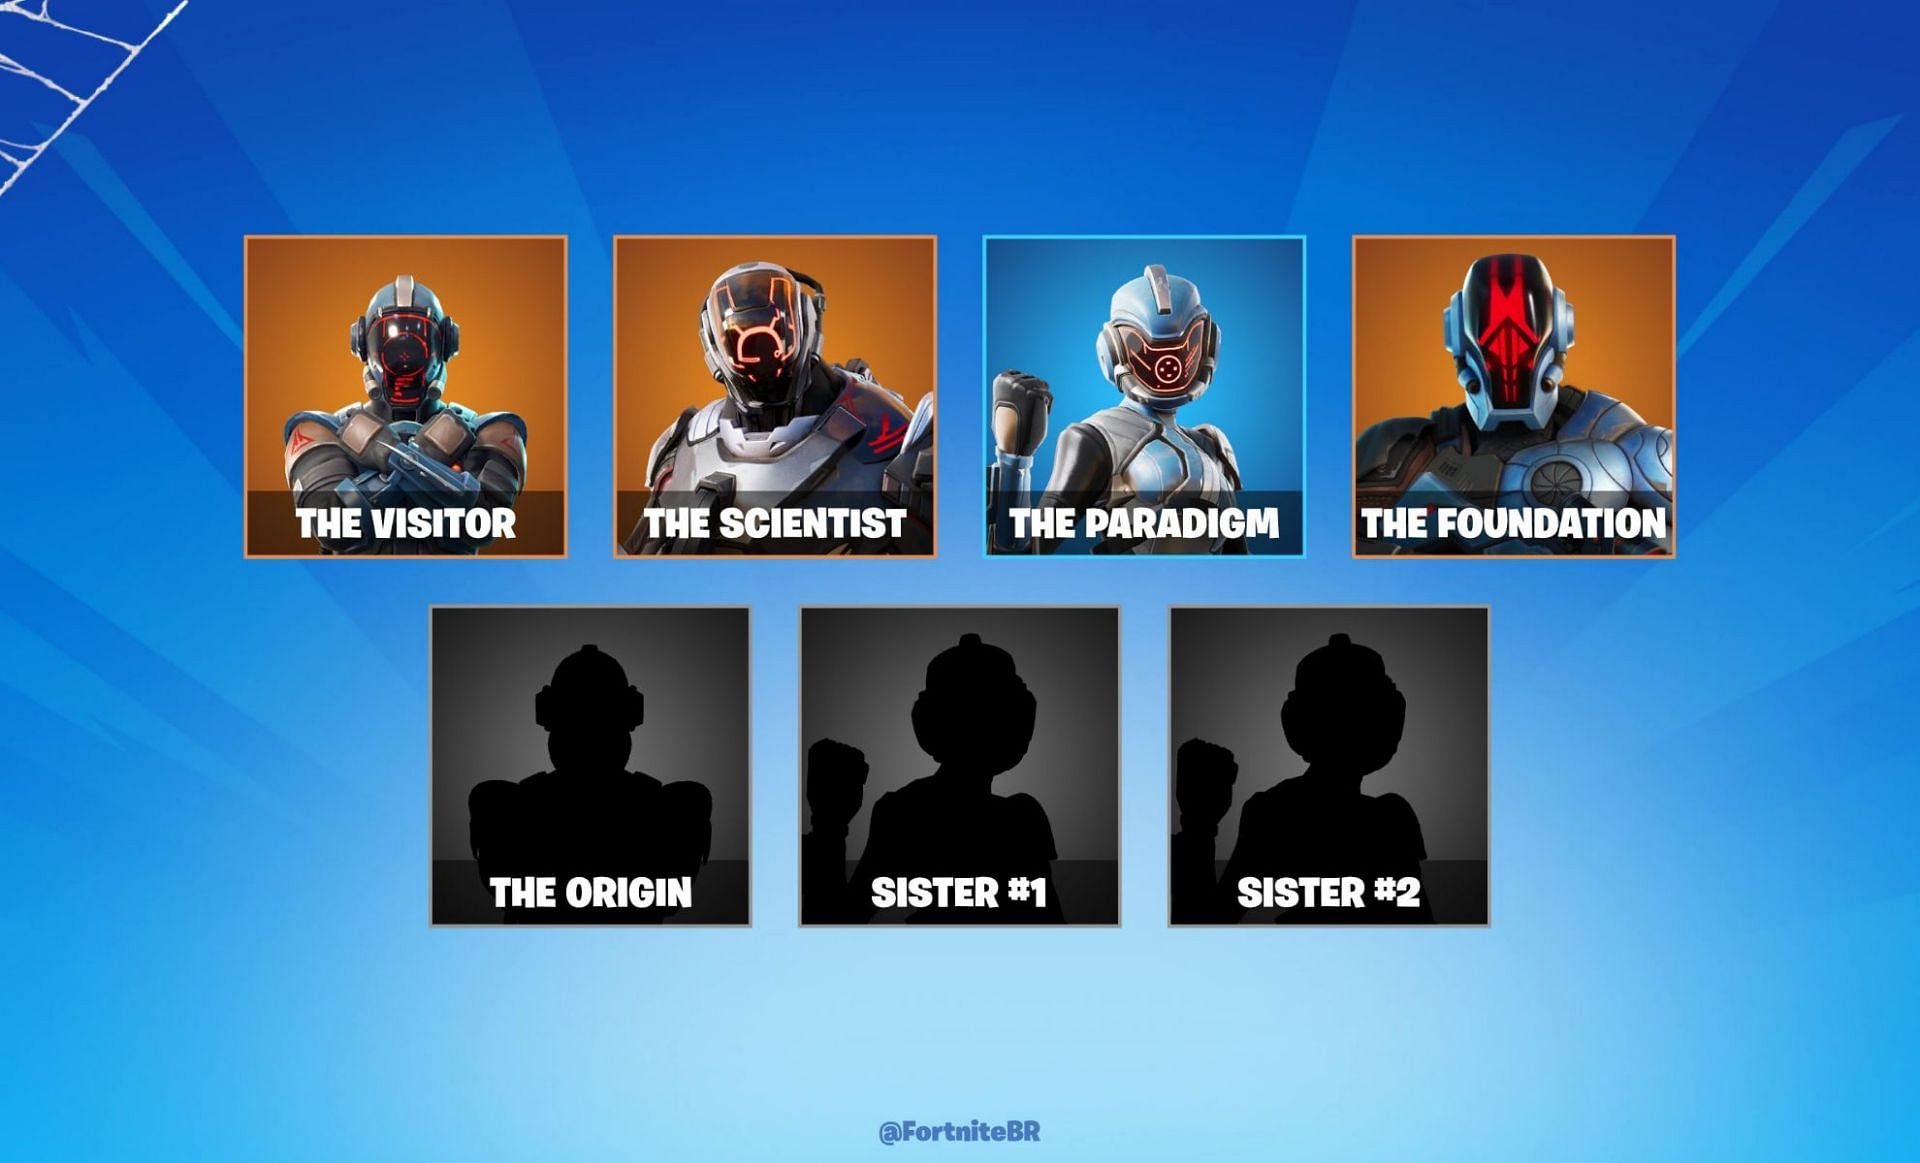 The Sisters could be revealed soon (Image via FortniteBR on Twitter)